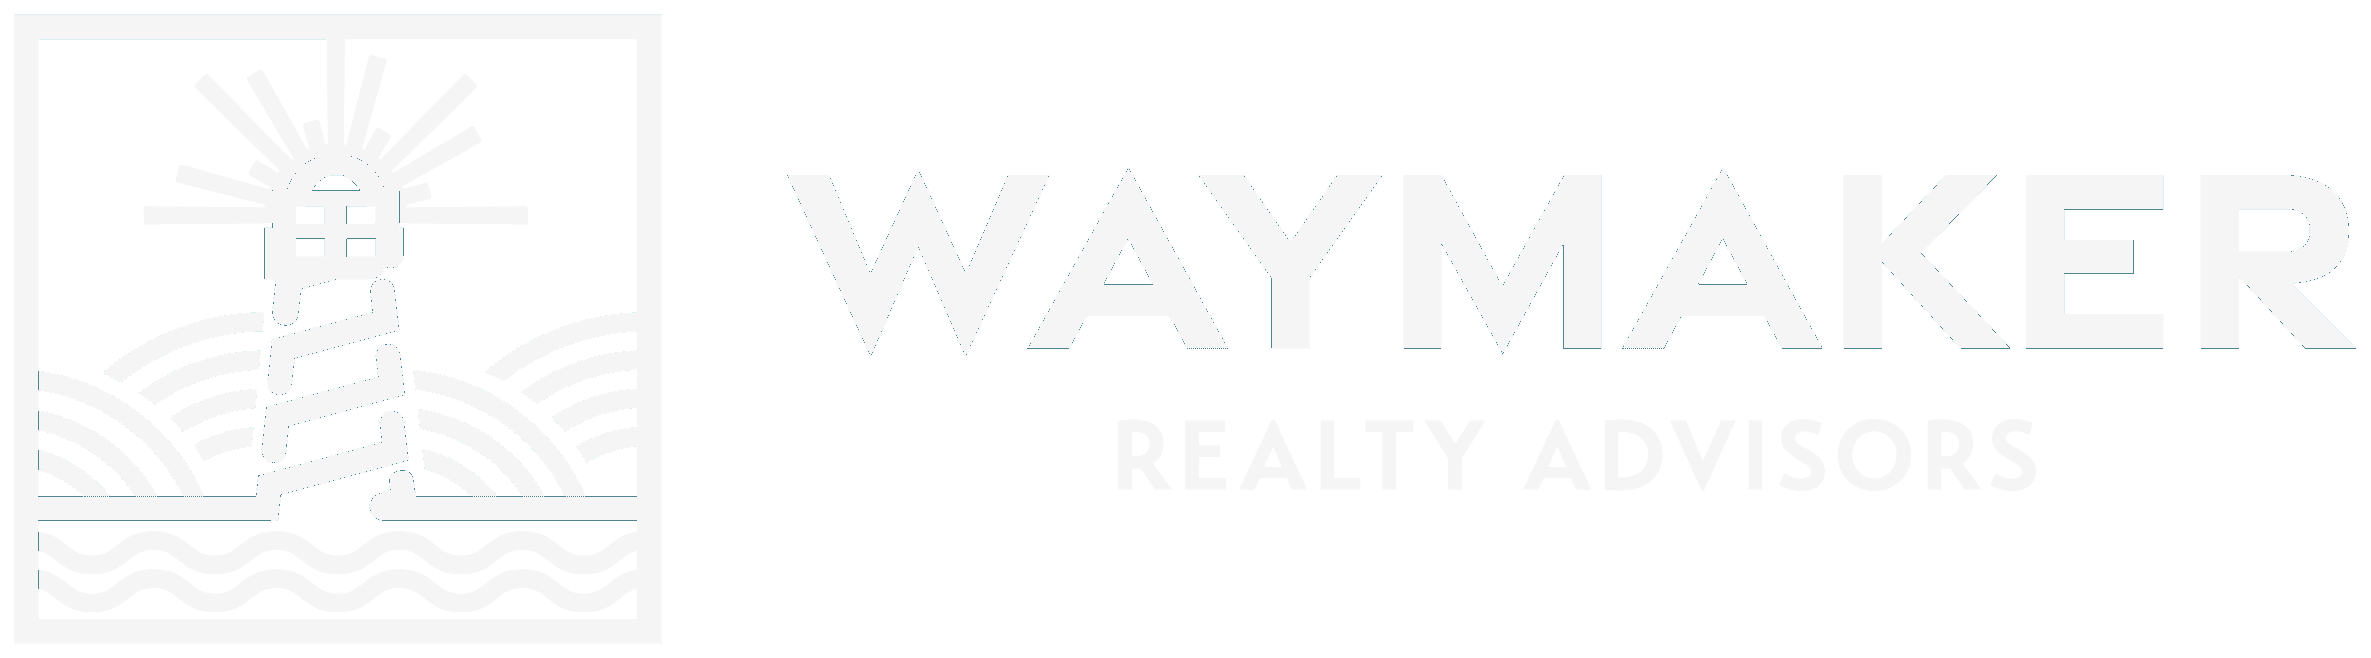 WayMaker Realty